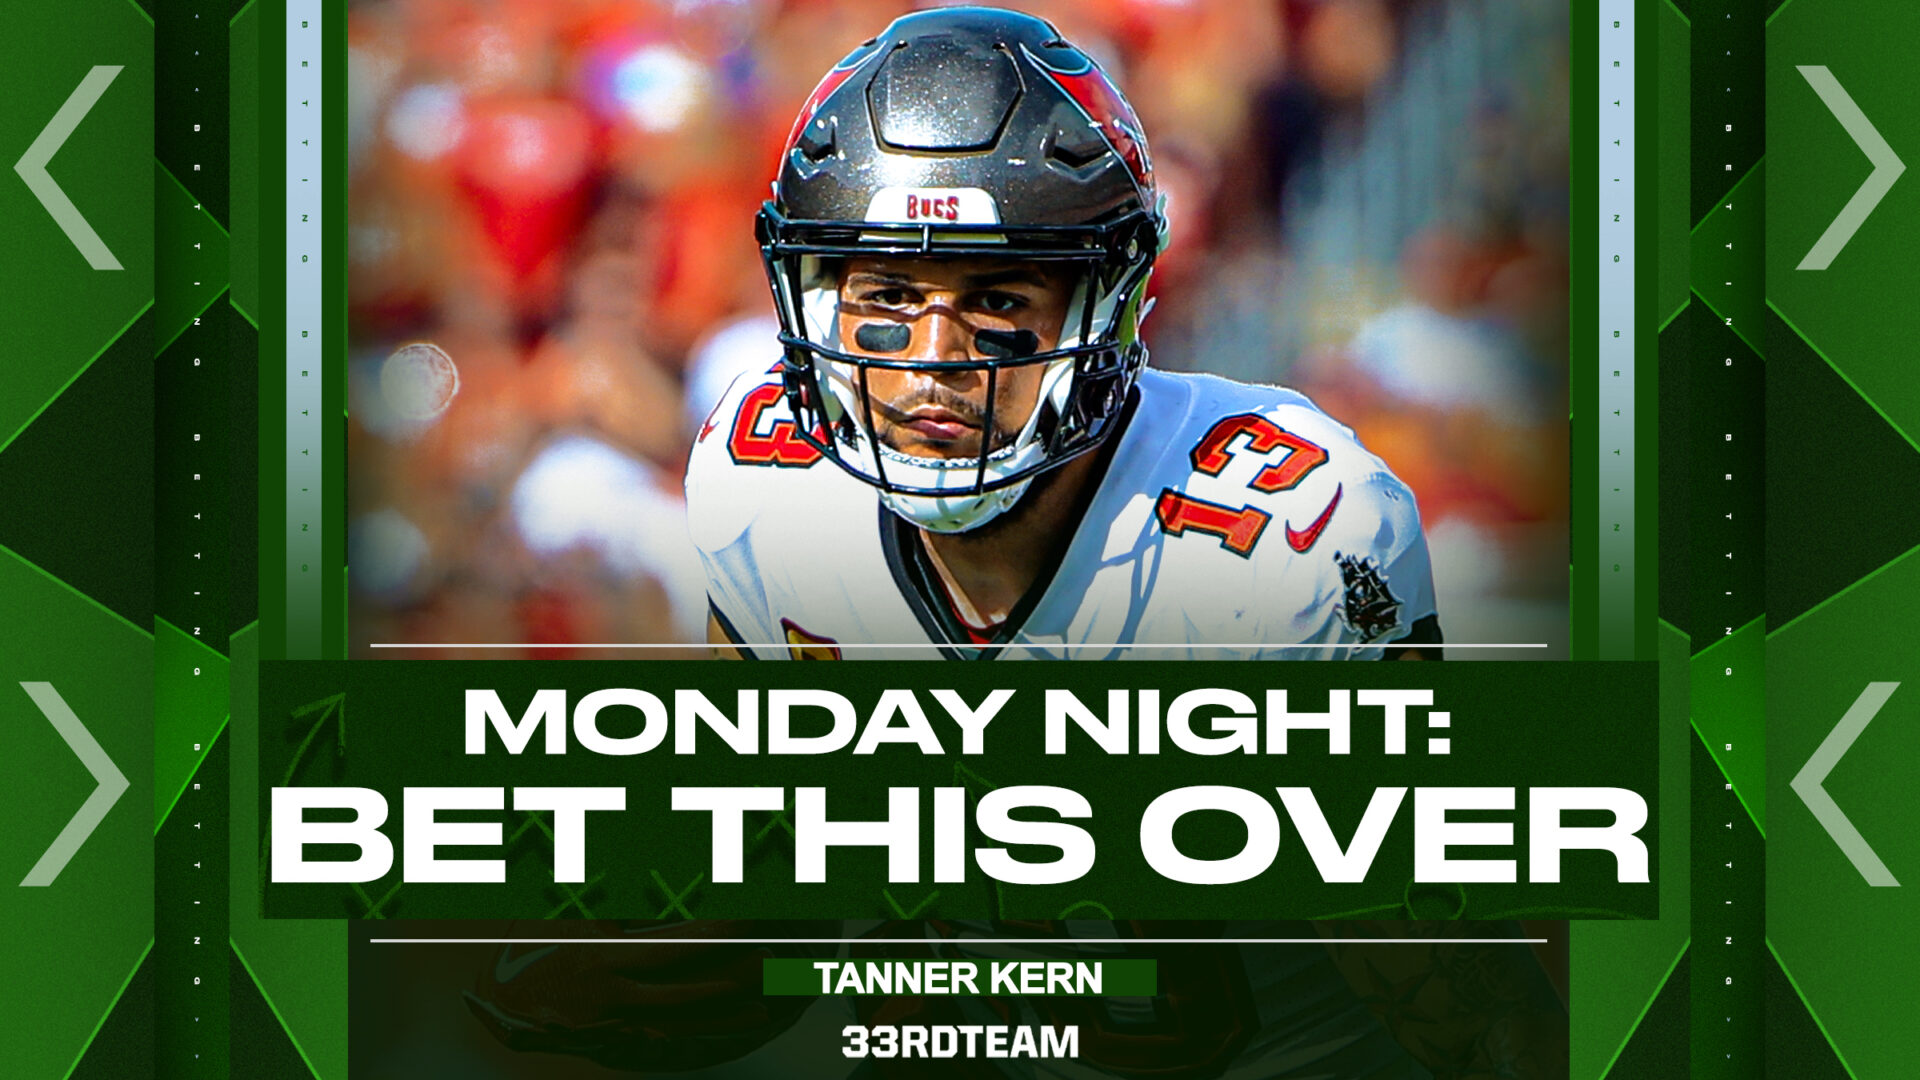 Smash This NFL Week 3 Mike Evans Bet for Monday Night Football